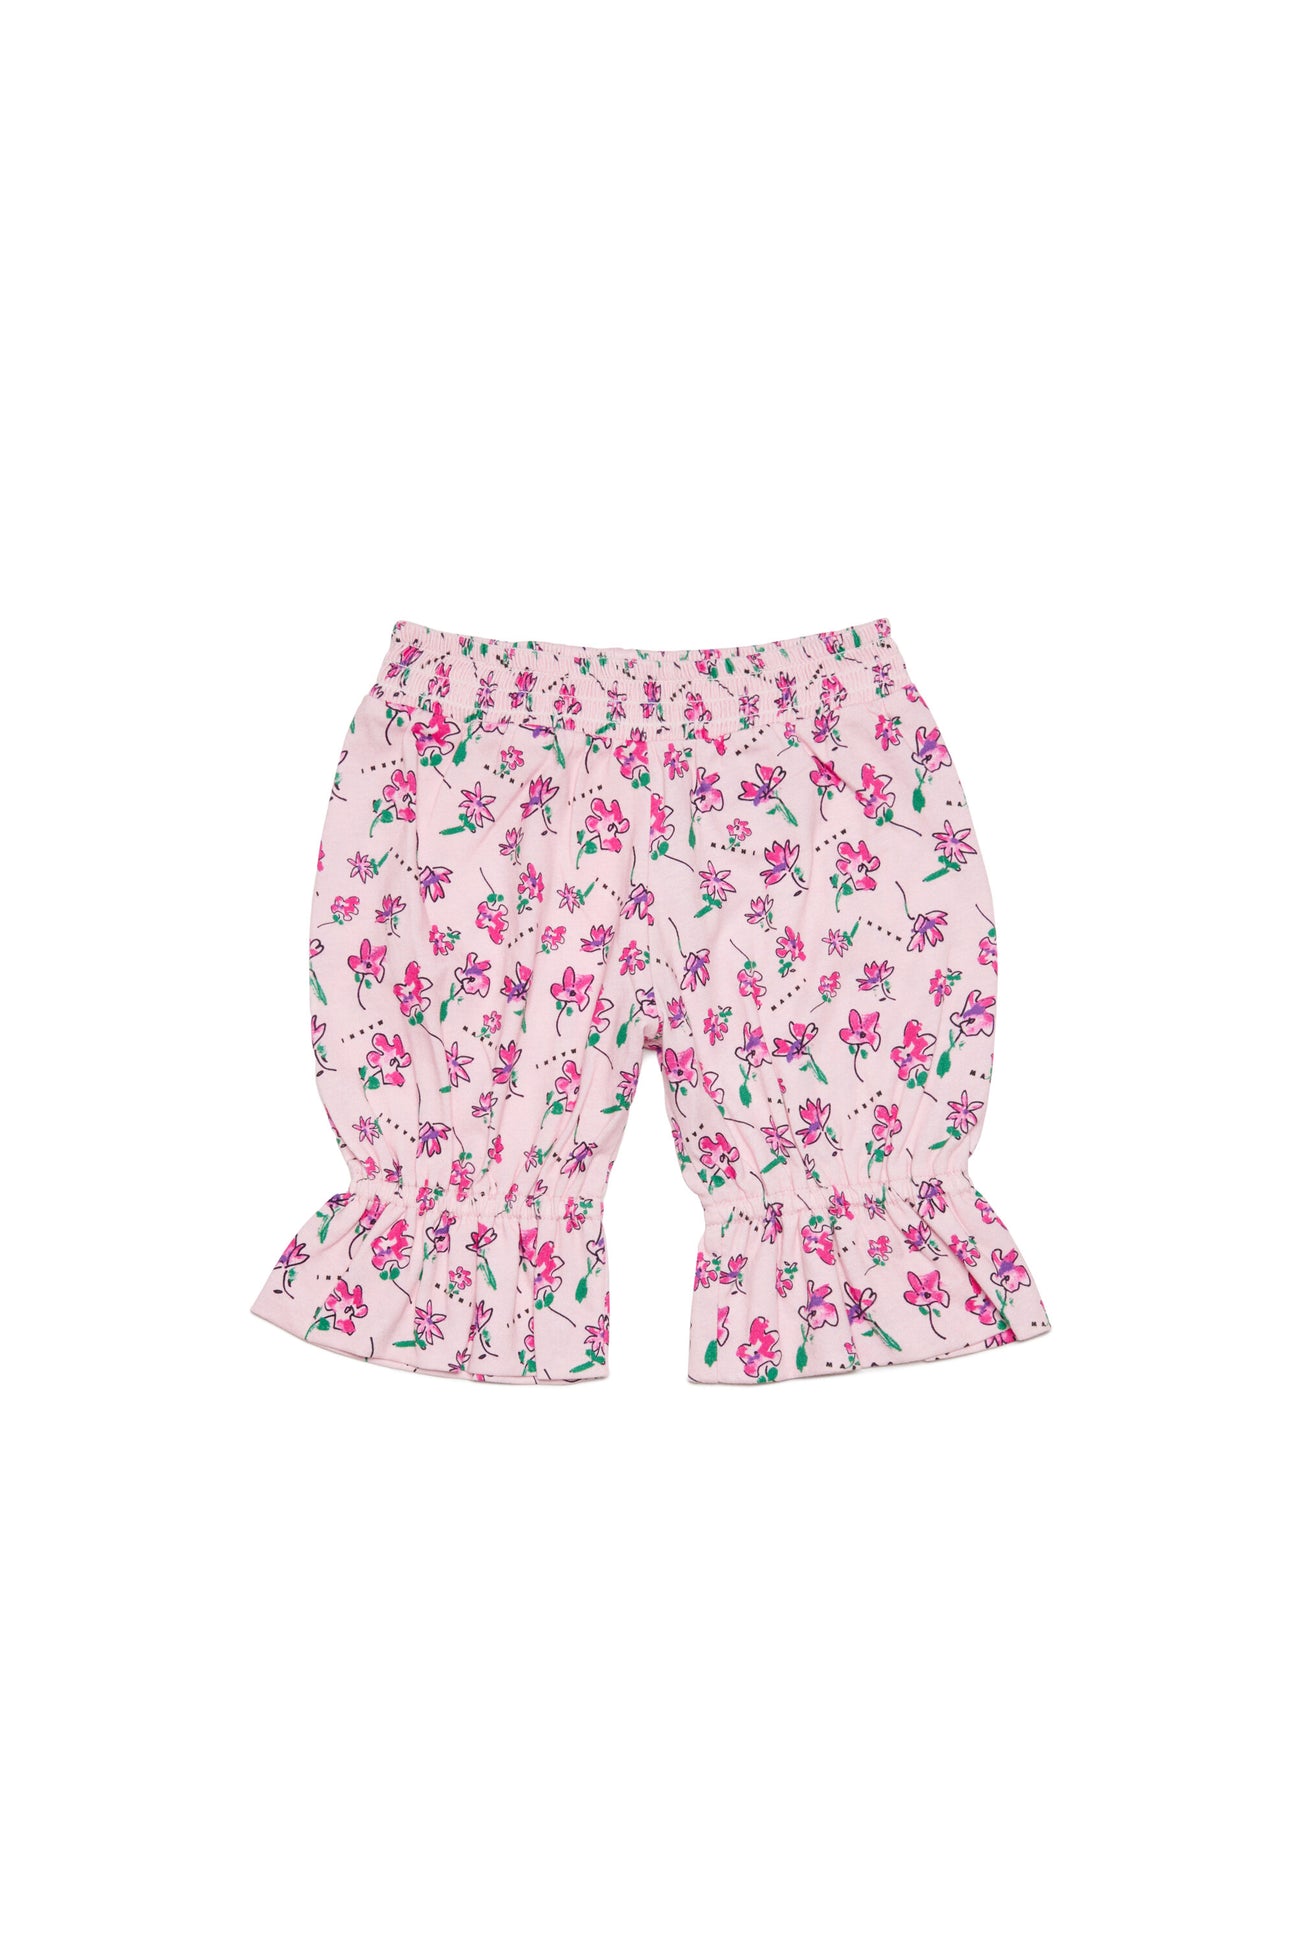 Allover pants Pink flowers Allover pants Pink flowers